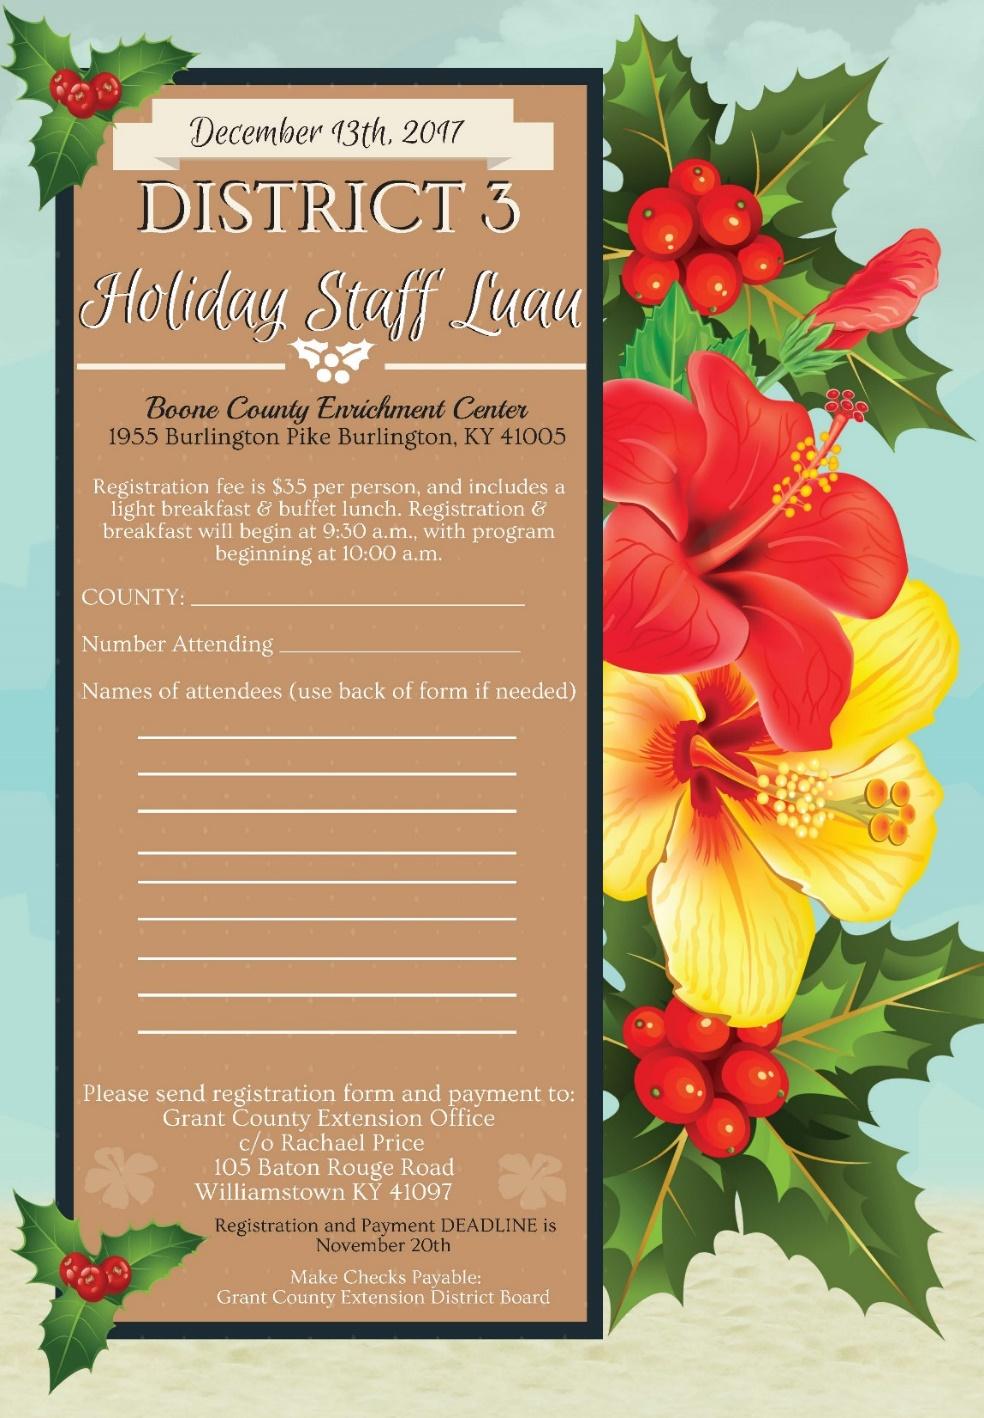 Holiday Staff Holiday Staff Luau Boone County Enrichment Center, $35 Registration Fee Registration & breakfast will begin at 9:30 a.m., with program beginning at 10:00 a.